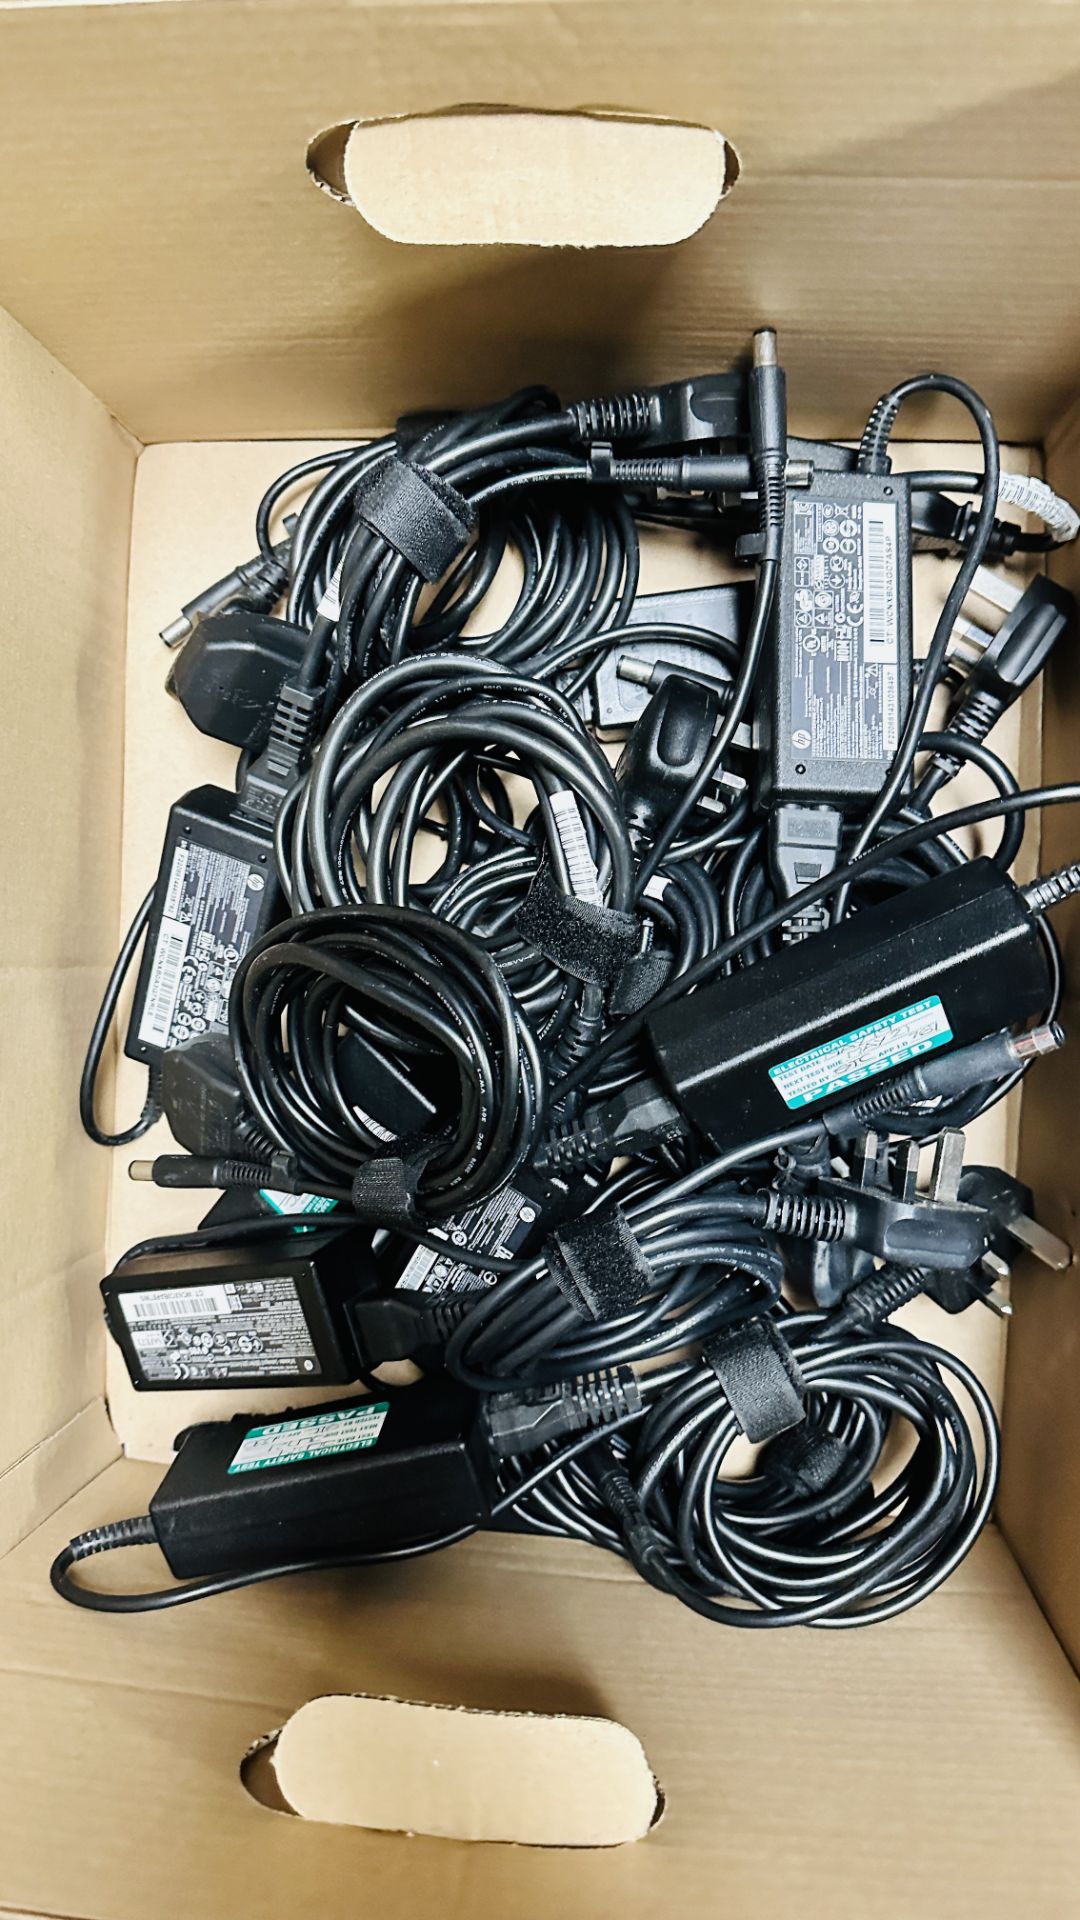 36 X LAPTOP CHARGERS FOR HP LAPTOPS MANY HP 65W AND 45W EXAMPLES - SOLD AS SEEN. - Image 4 of 9